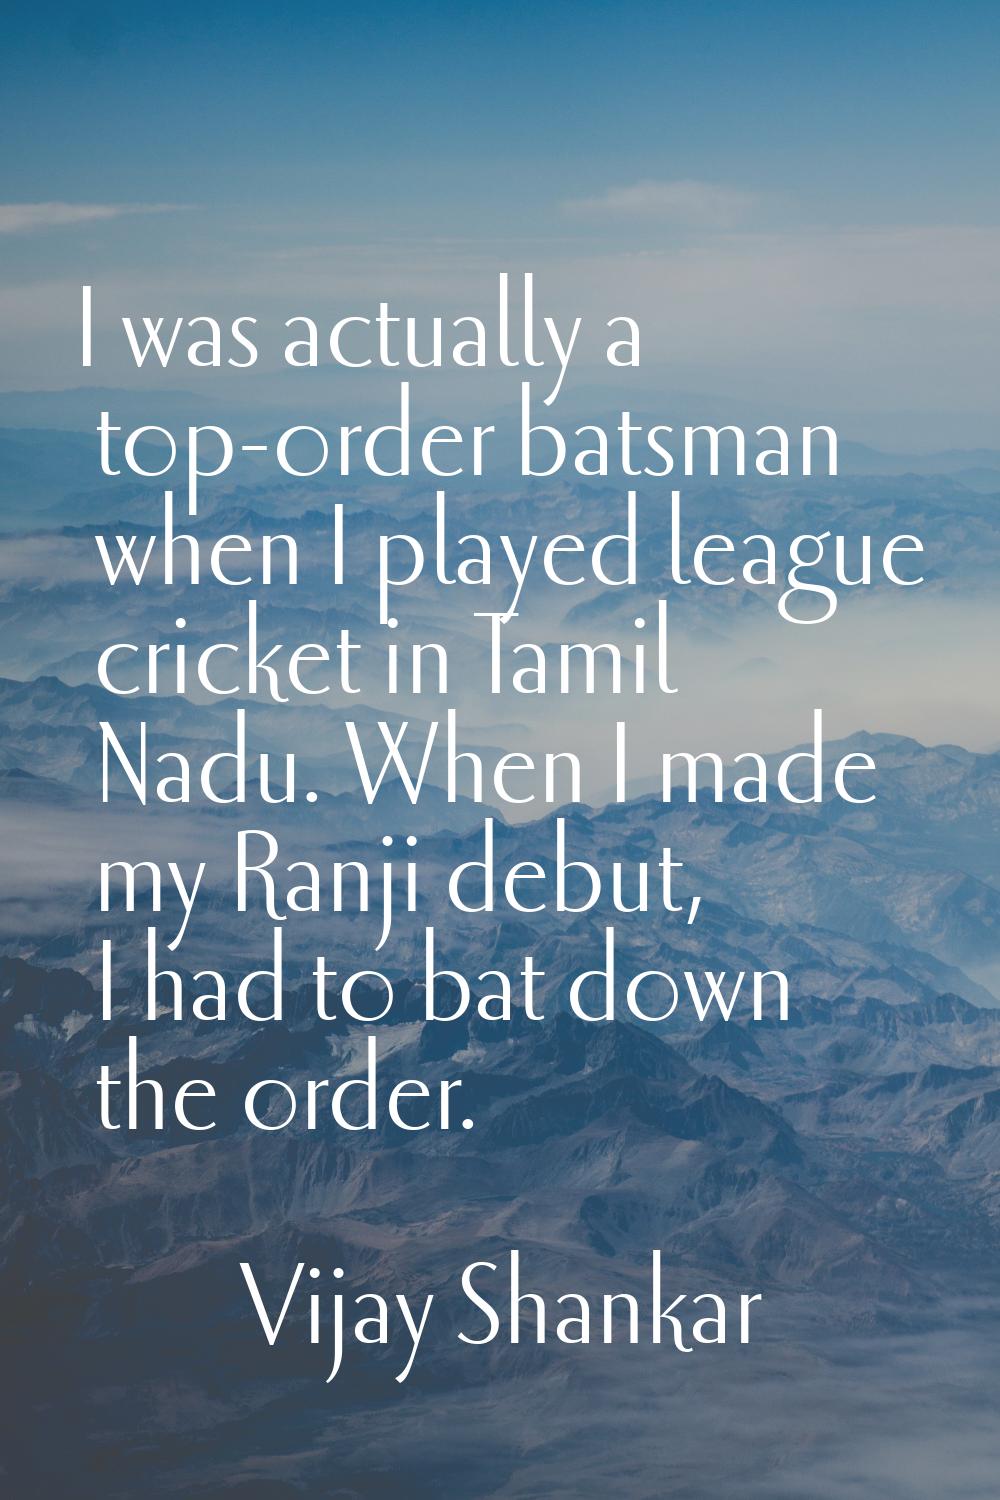 I was actually a top-order batsman when I played league cricket in Tamil Nadu. When I made my Ranji